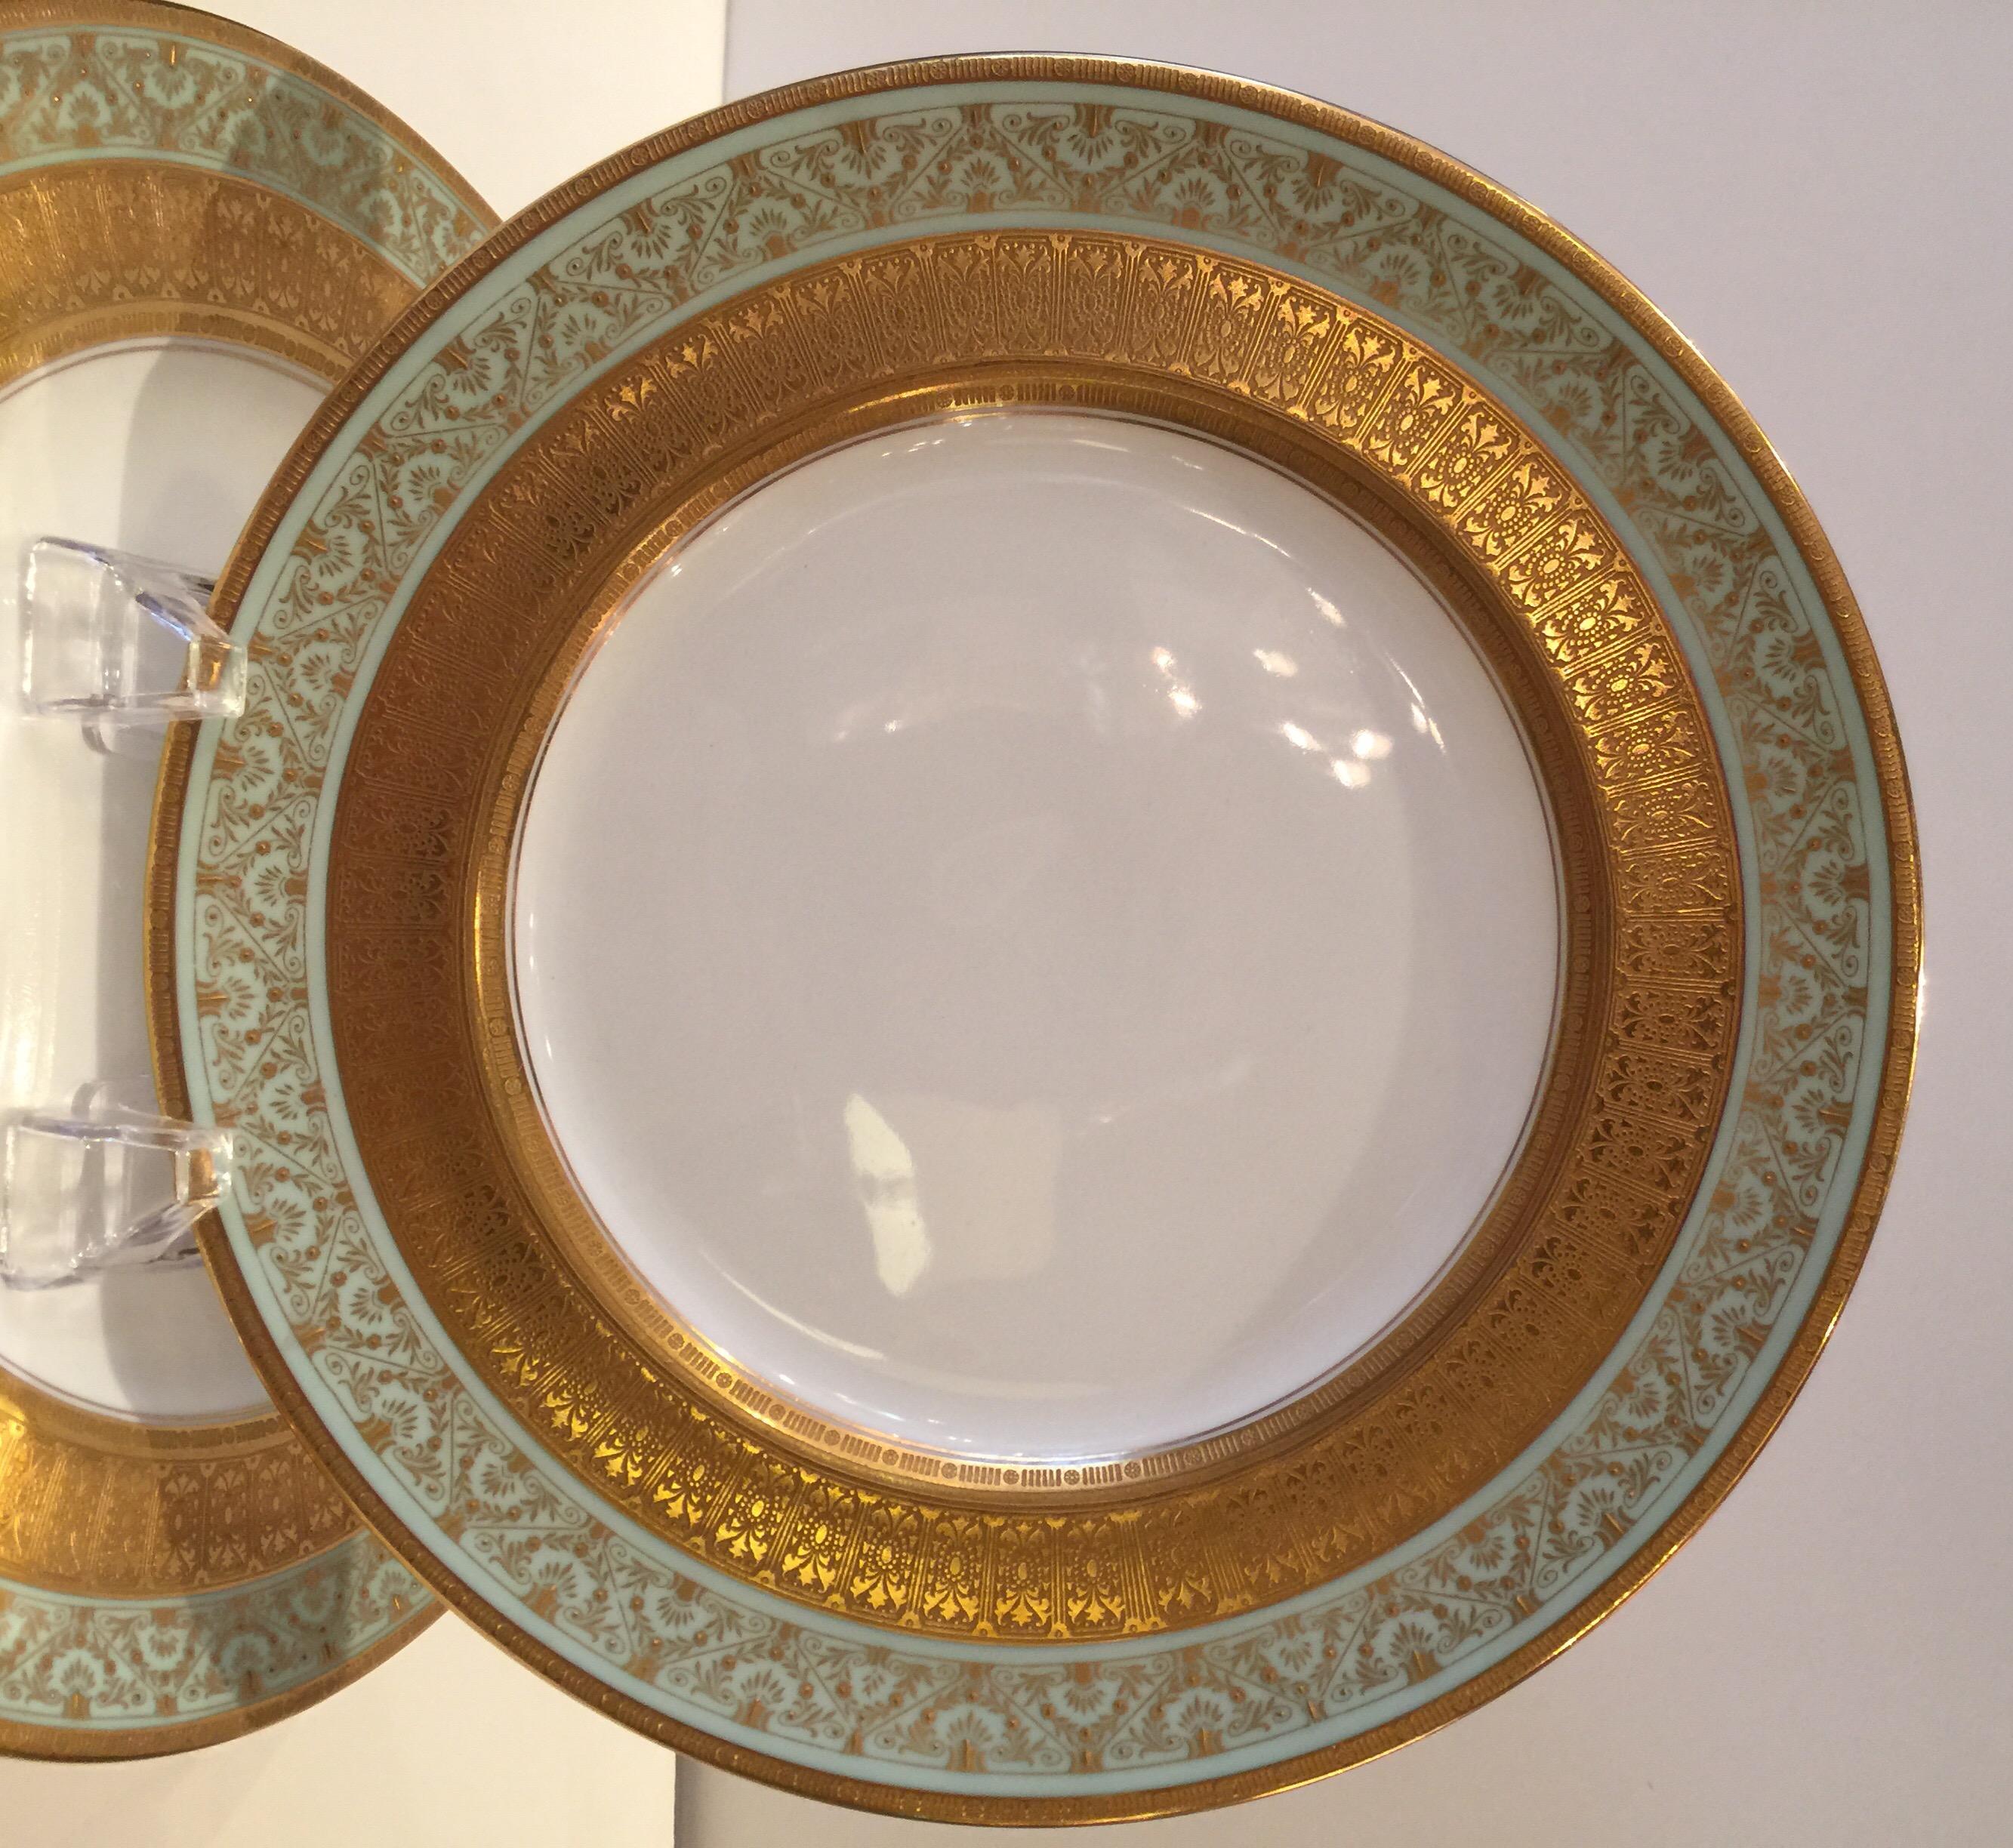 Set of eight Royal Doulton dinner or service plates, circa 1900-1920
Dimensions: 10.5 inches.